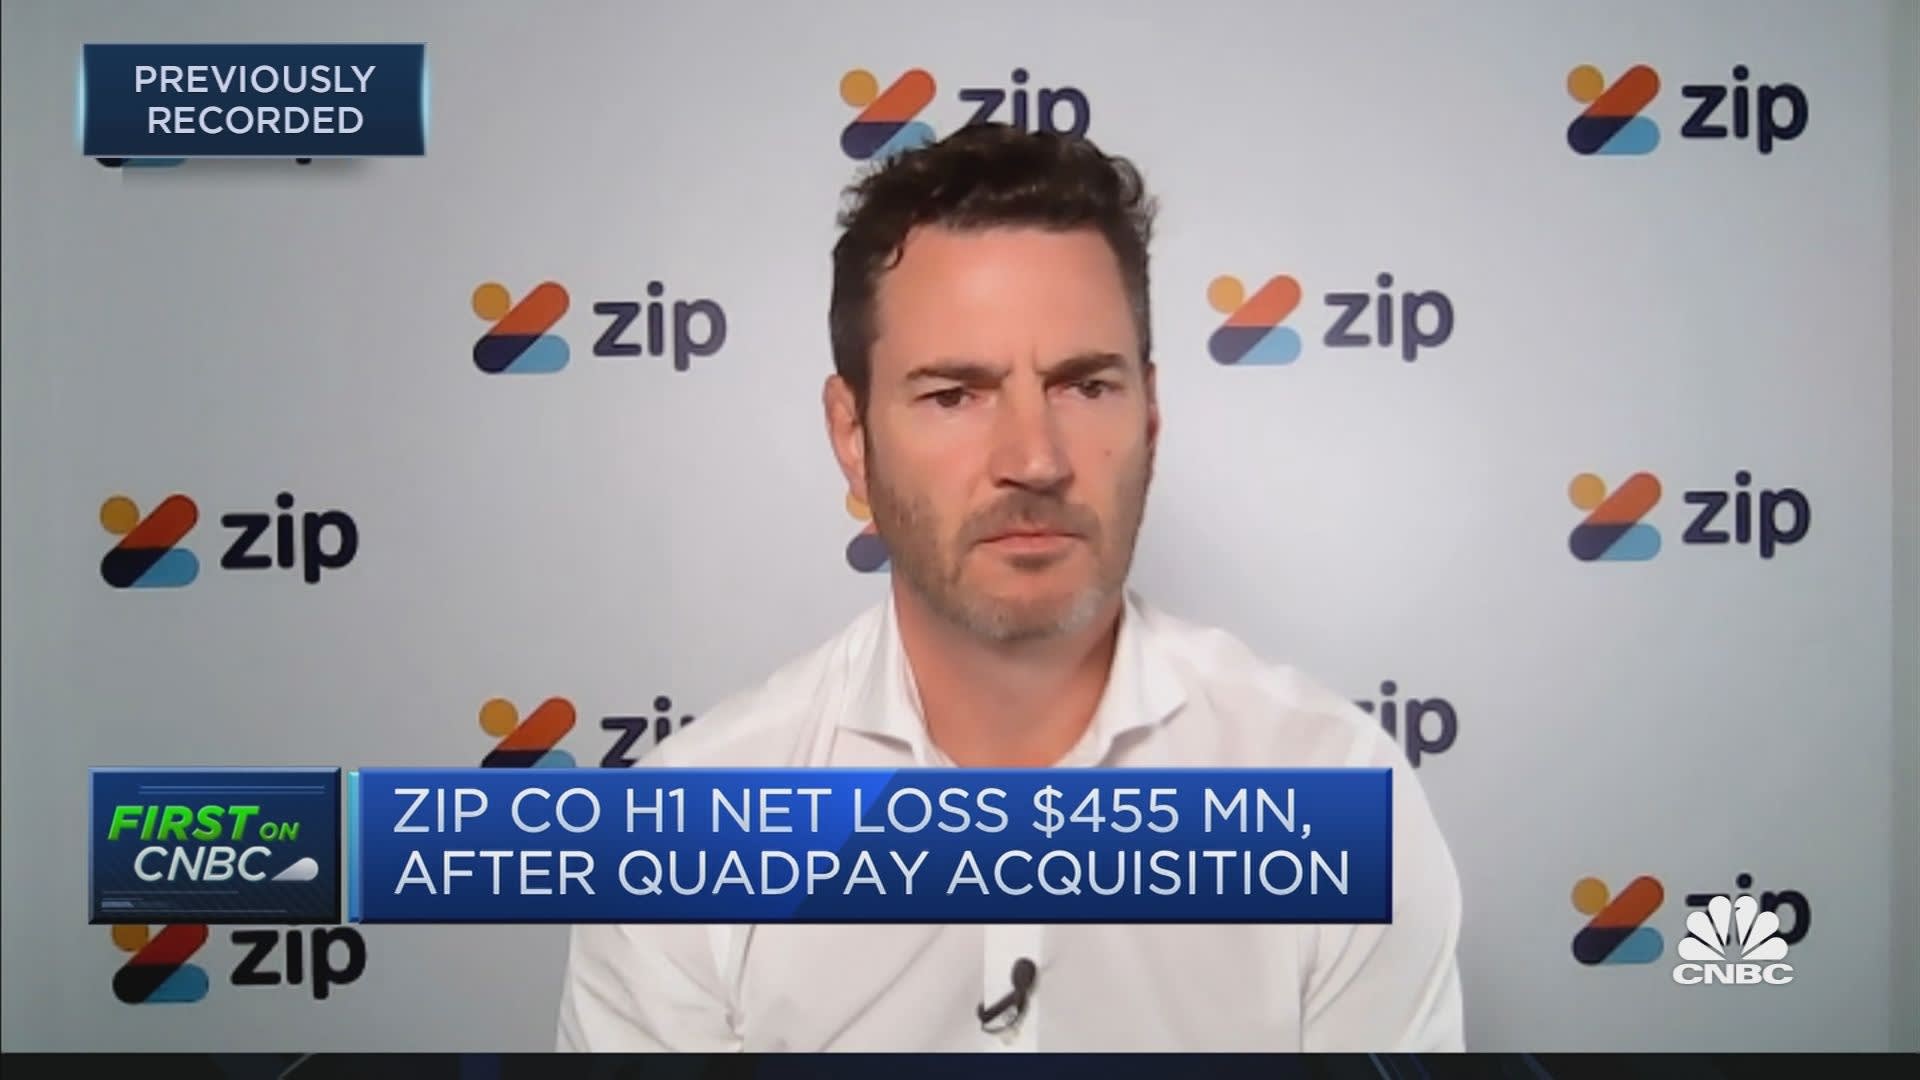 Buy now, pay later' firm Zip is confident about its future overseas